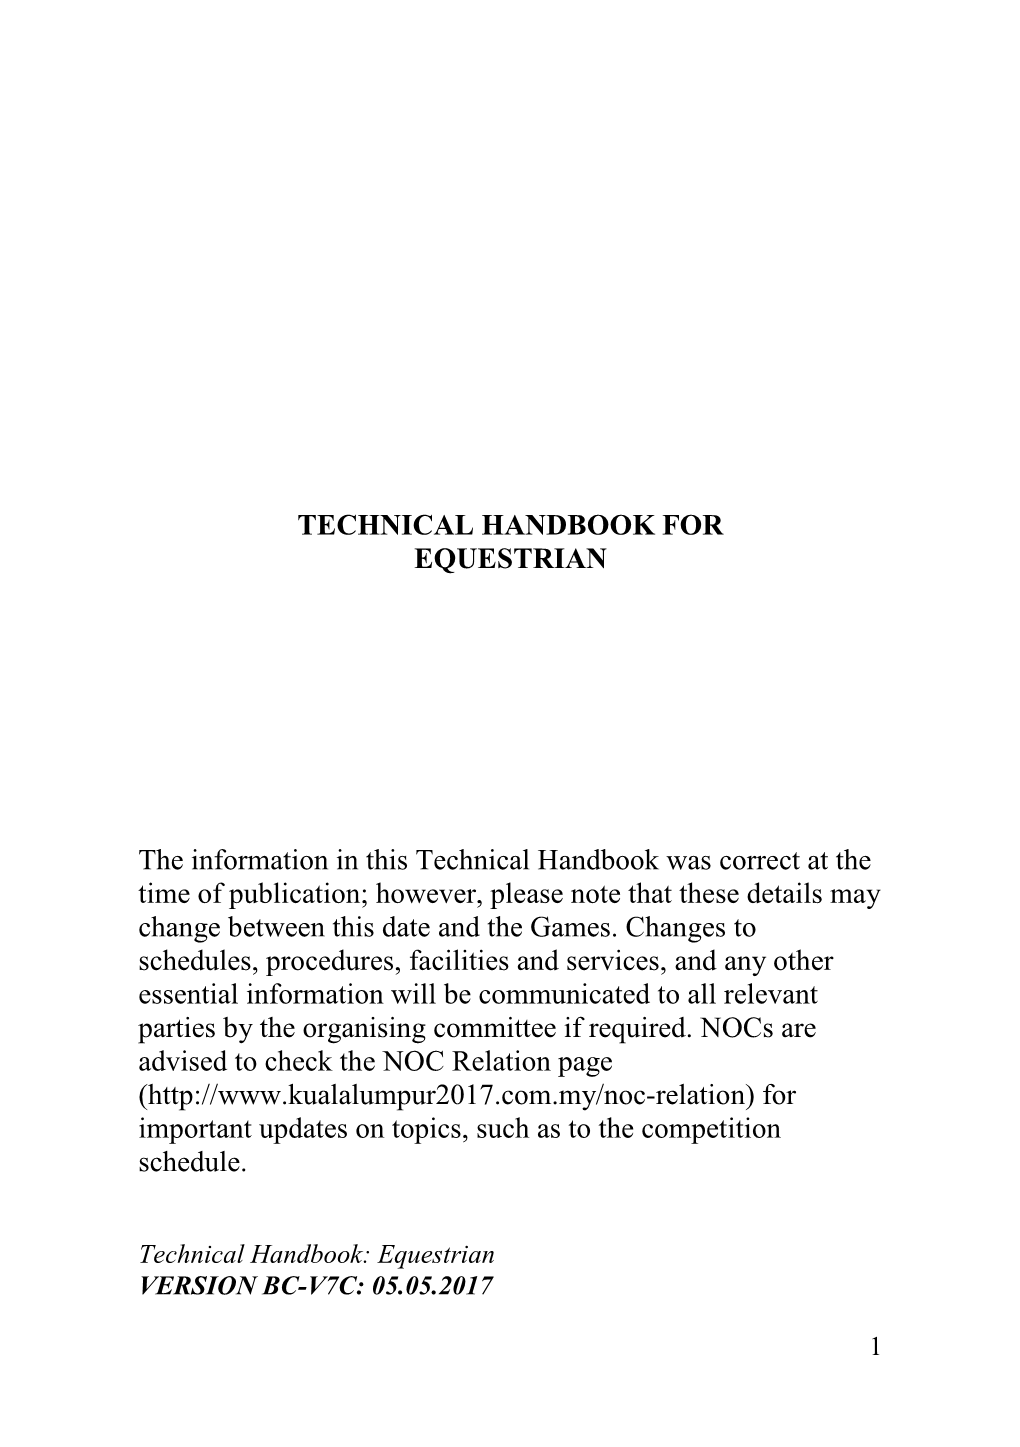 TECHNICAL HANDBOOK for EQUESTRIAN the Information